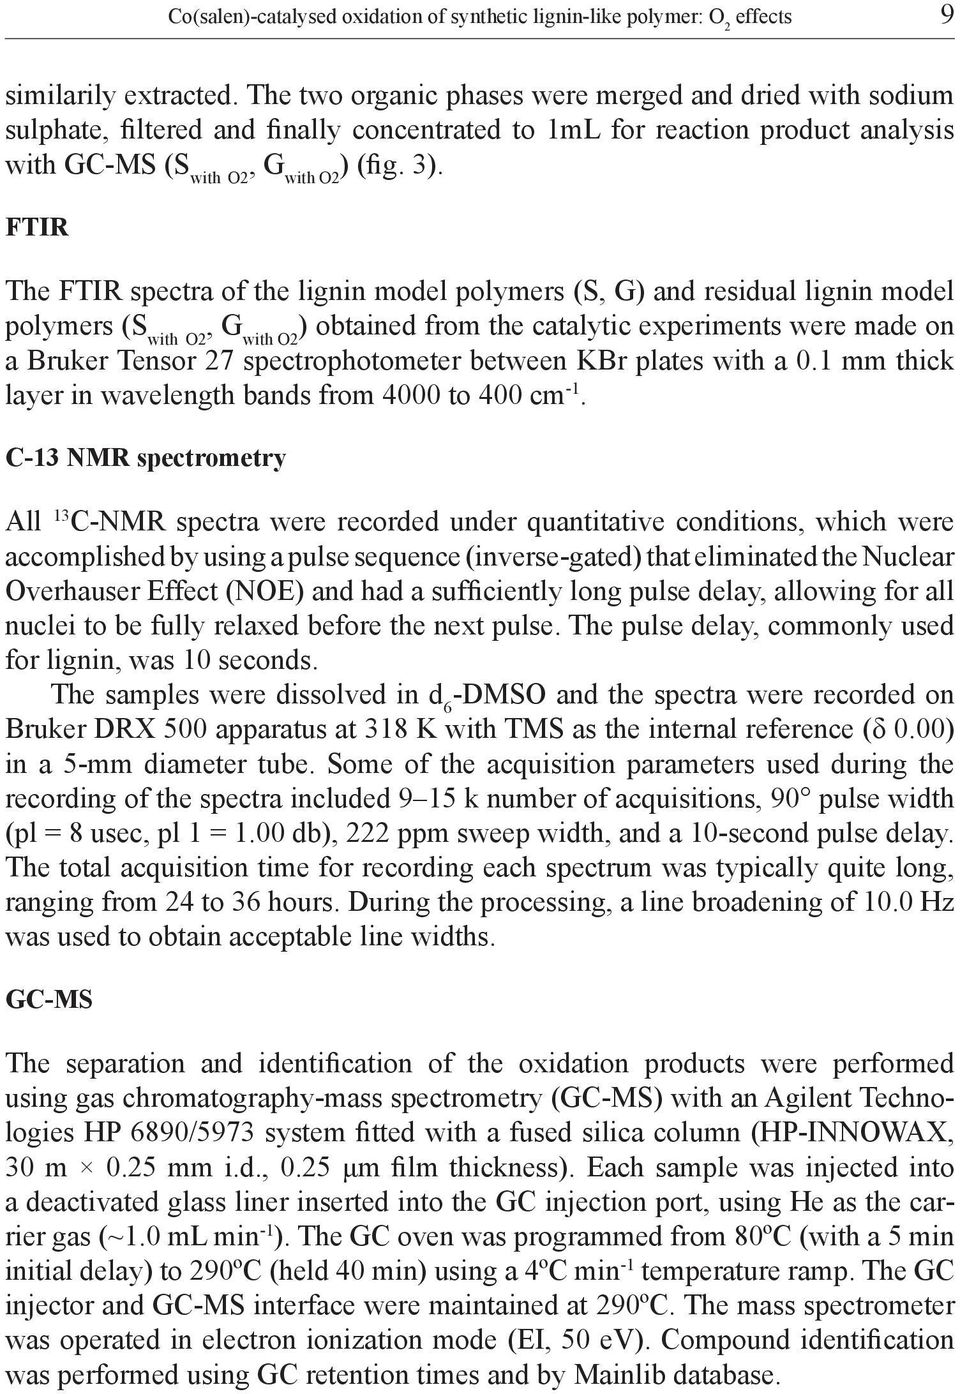 FTIR The FTIR spectra of the lignin model polymers (S, G) and residual lignin model polymers (S with O2, G with O2 ) obtained from the catalytic experiments were made on a Bruker Tensor 27